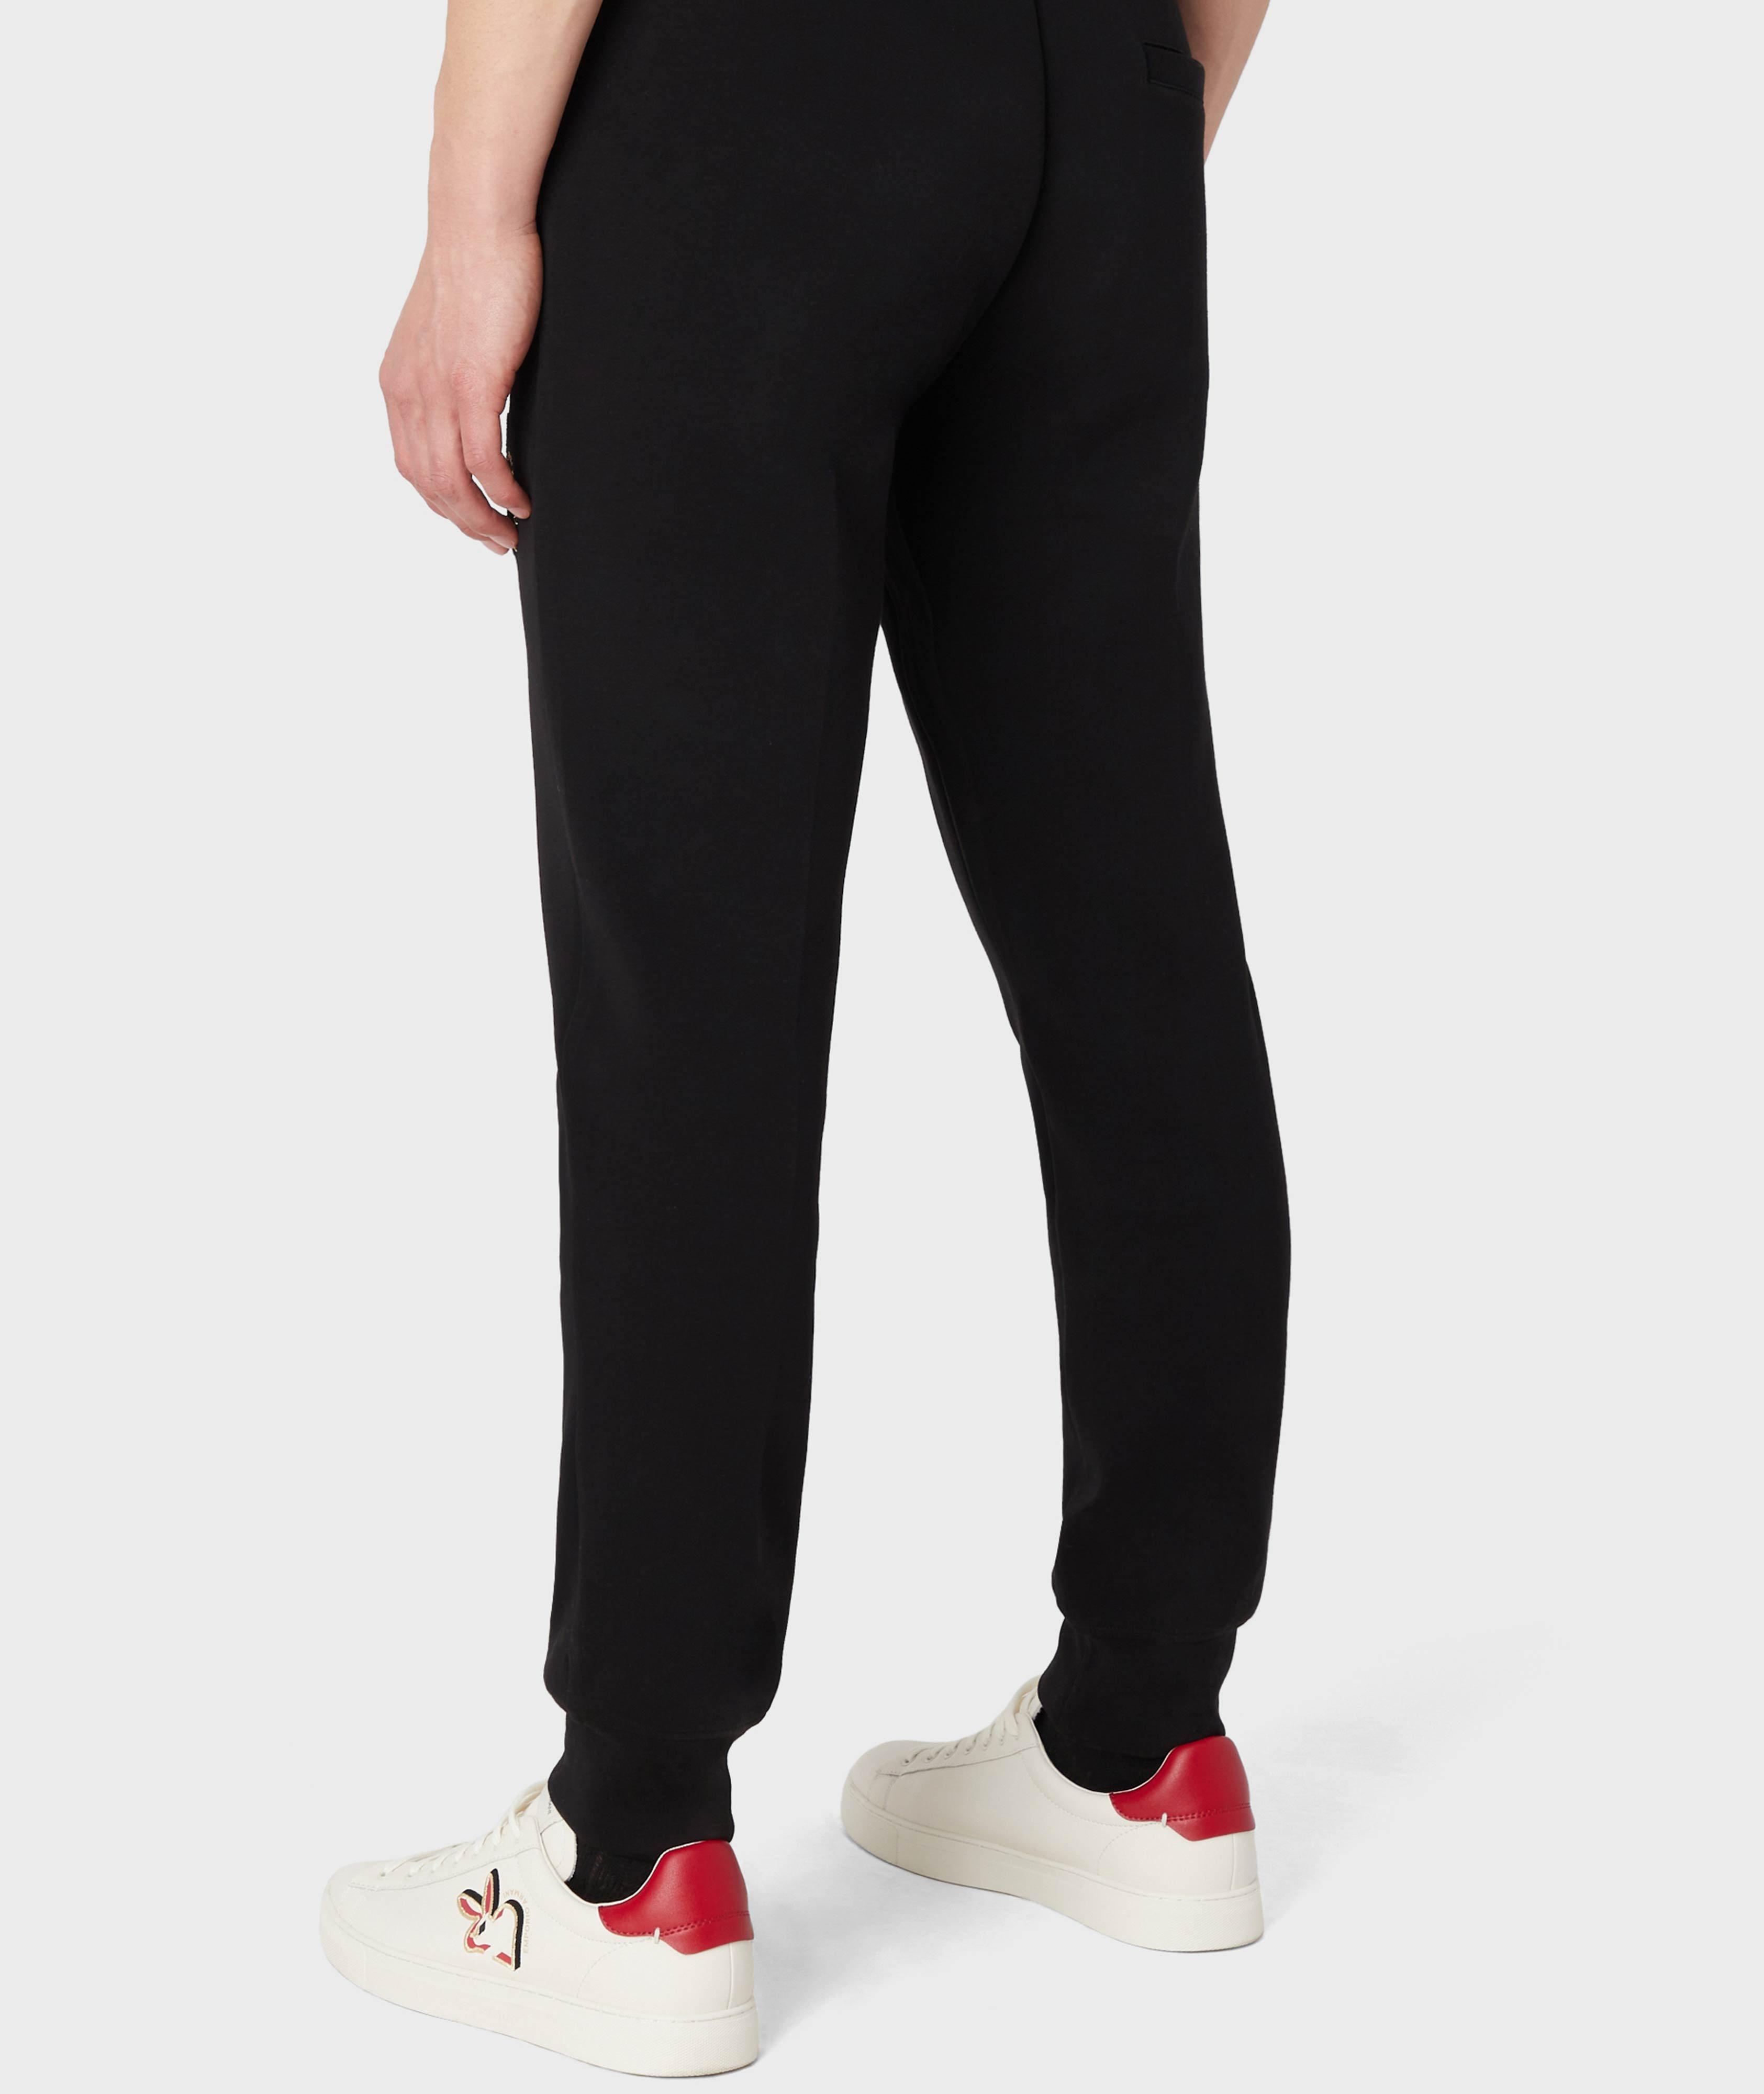 Emporio Armani Lunar New Year Double-Jersey Joggers | Pants | Harry Rosen